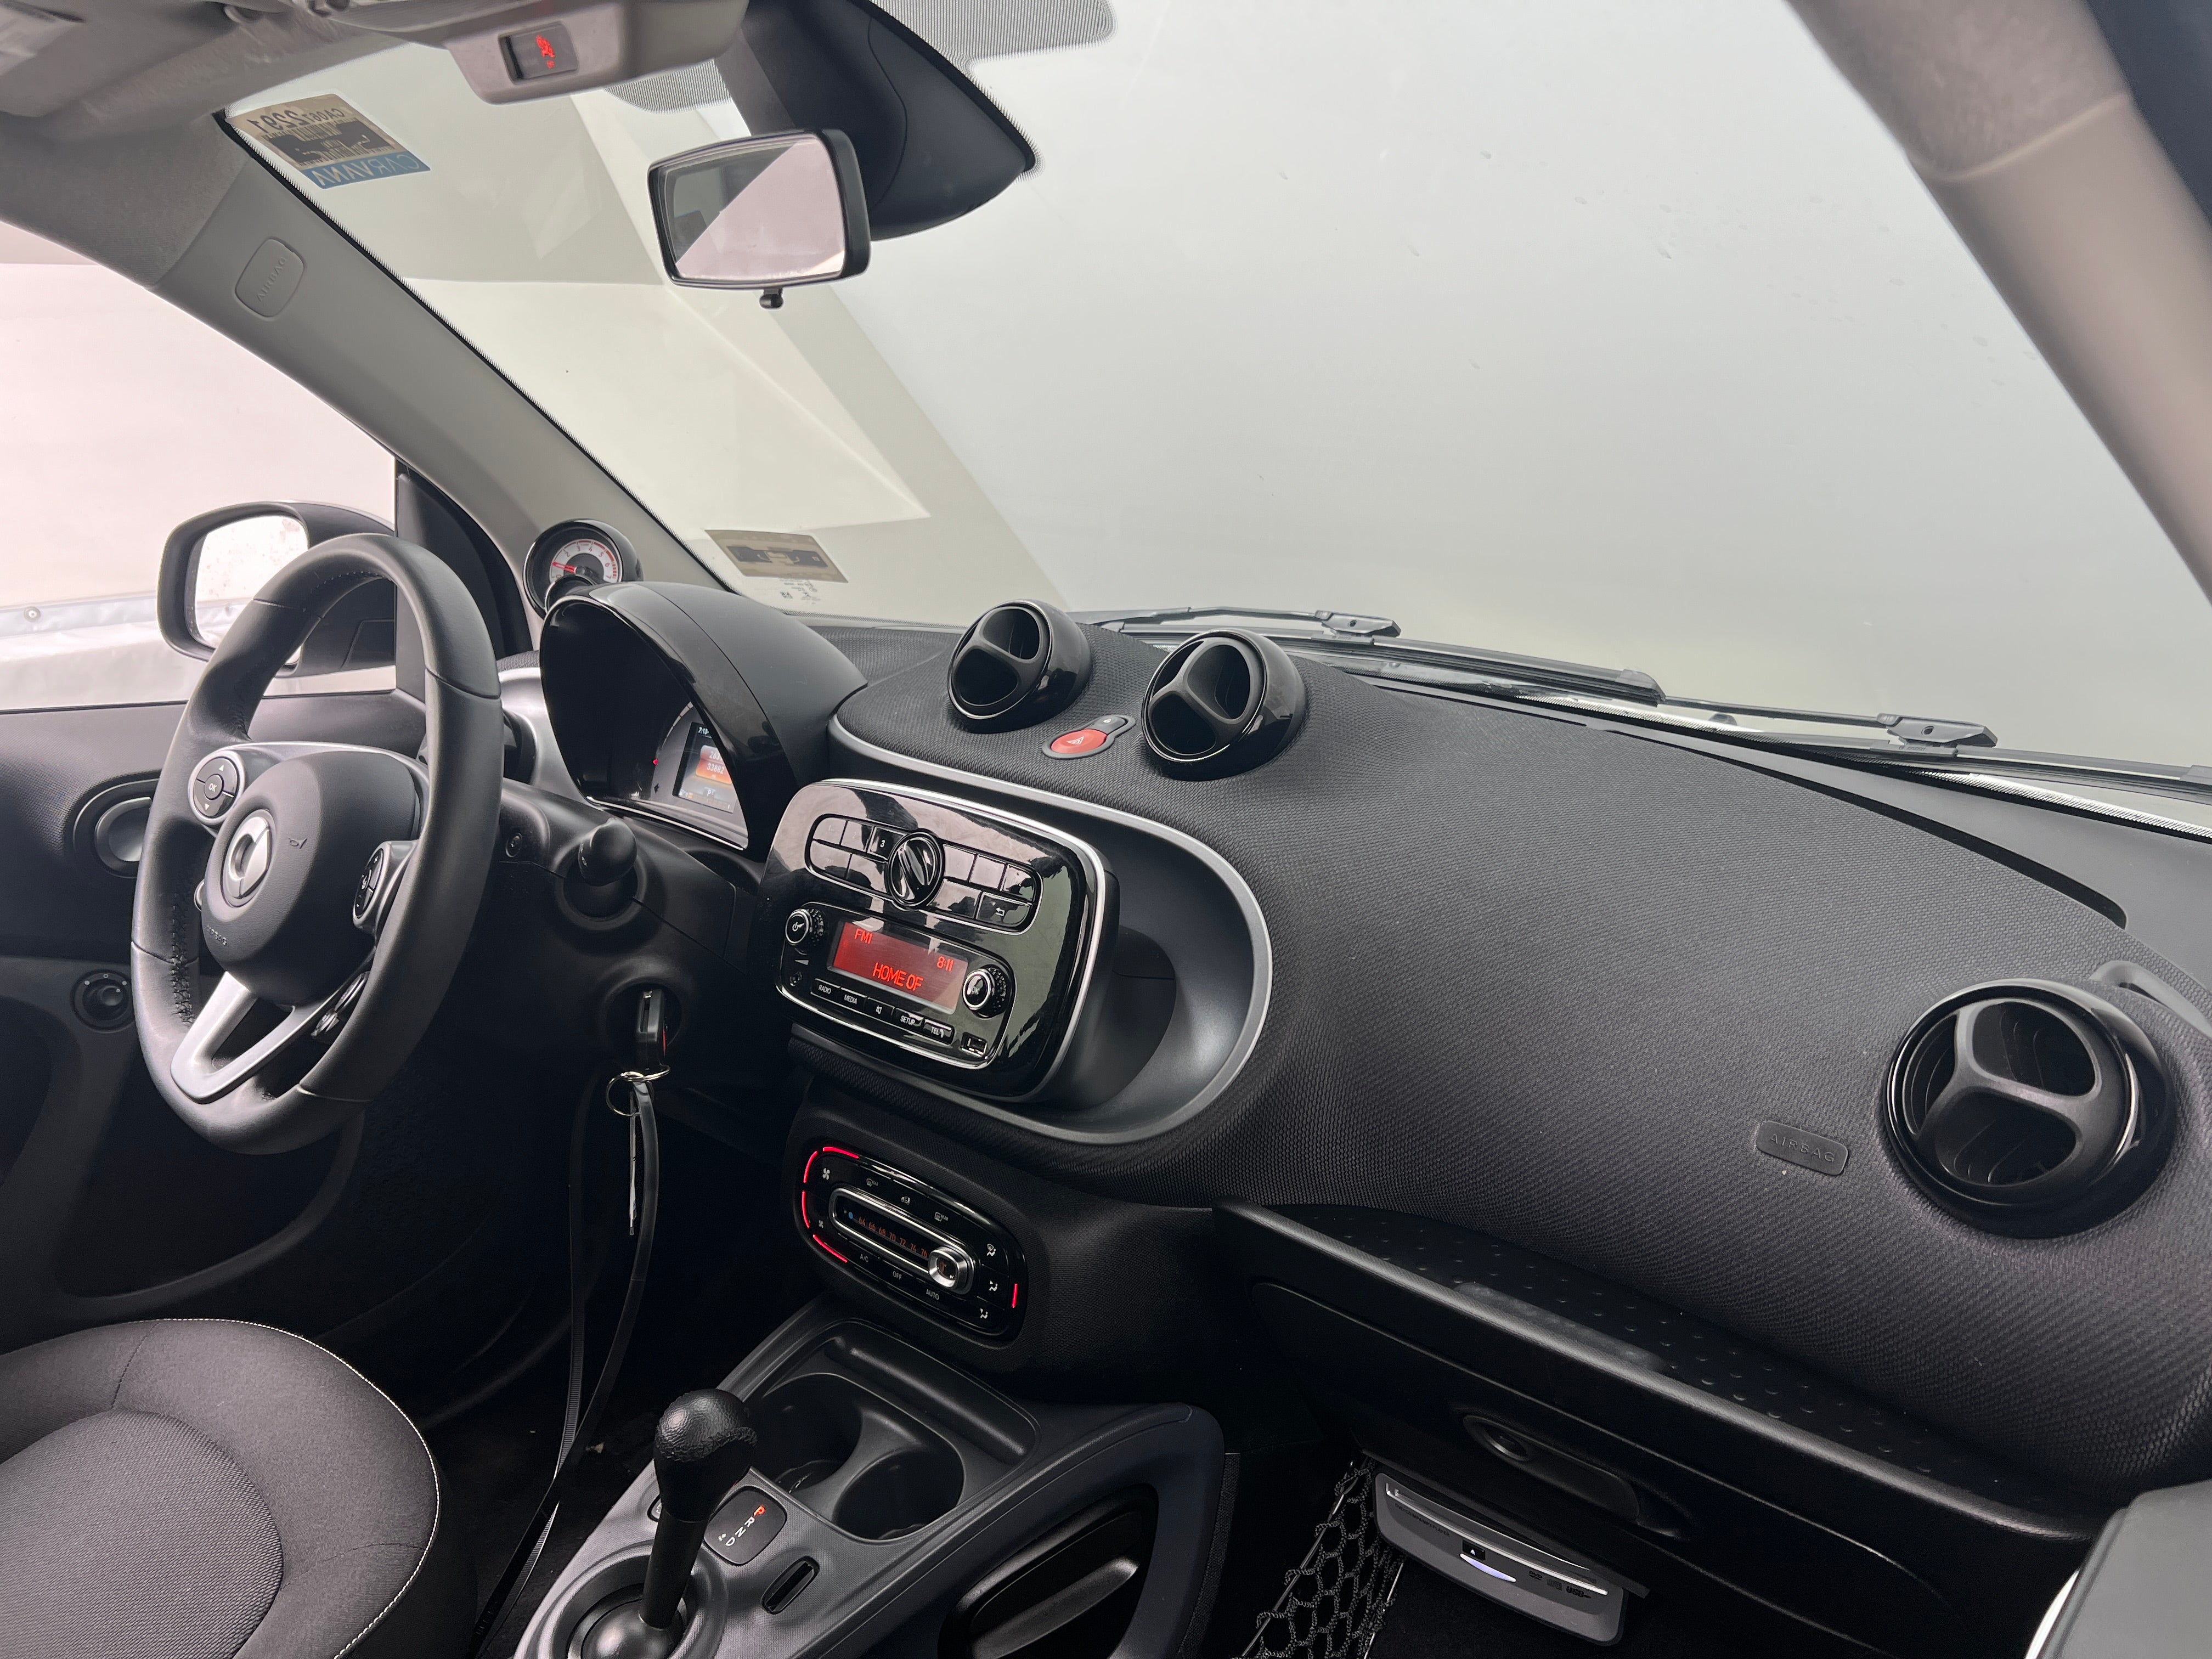 Used smart fortwo for Sale Online